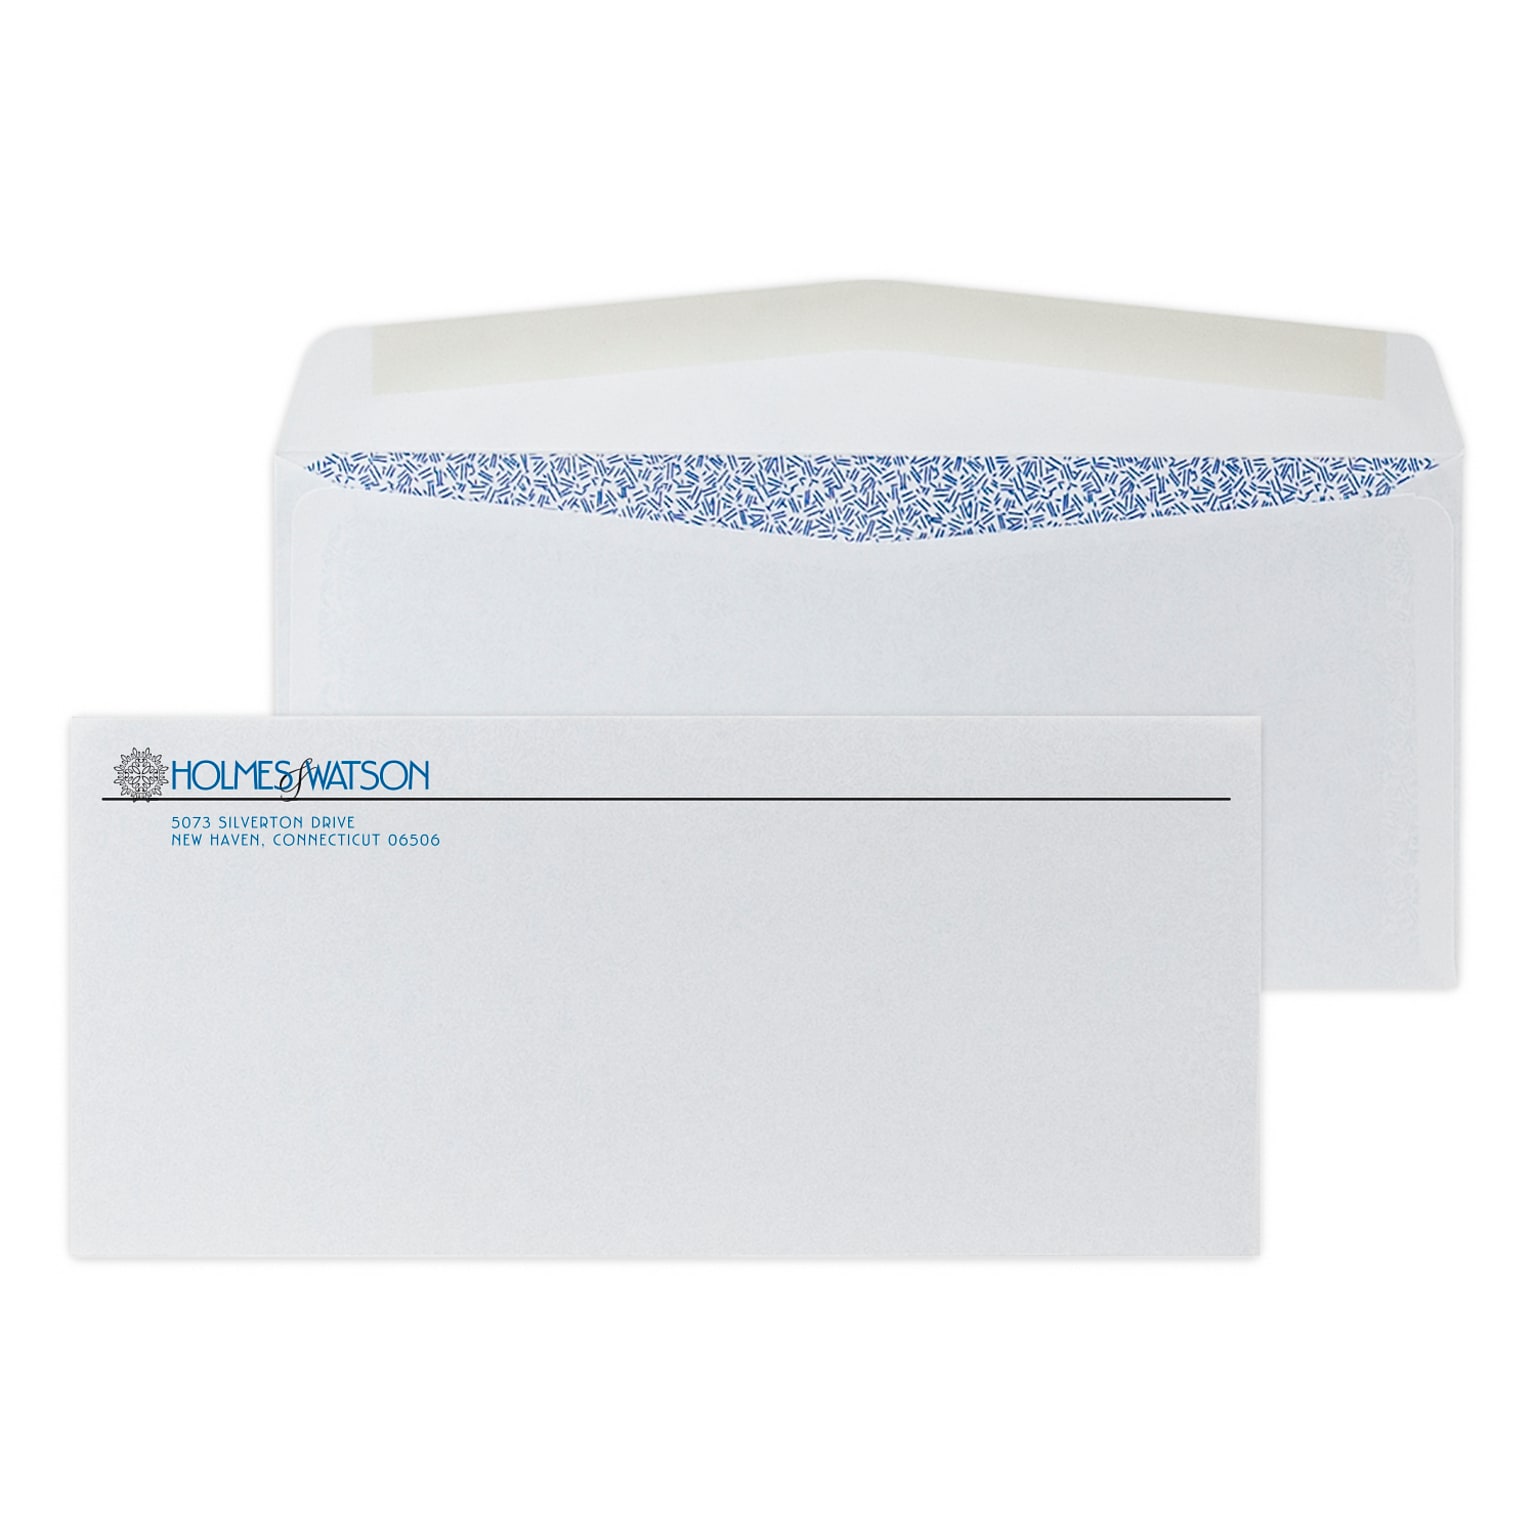 Custom #10 Standard Envelopes with Security Tint, 4 1/4 x 9 1/2, 24# White Wove, 2 Standard Inks, 250 / Pack